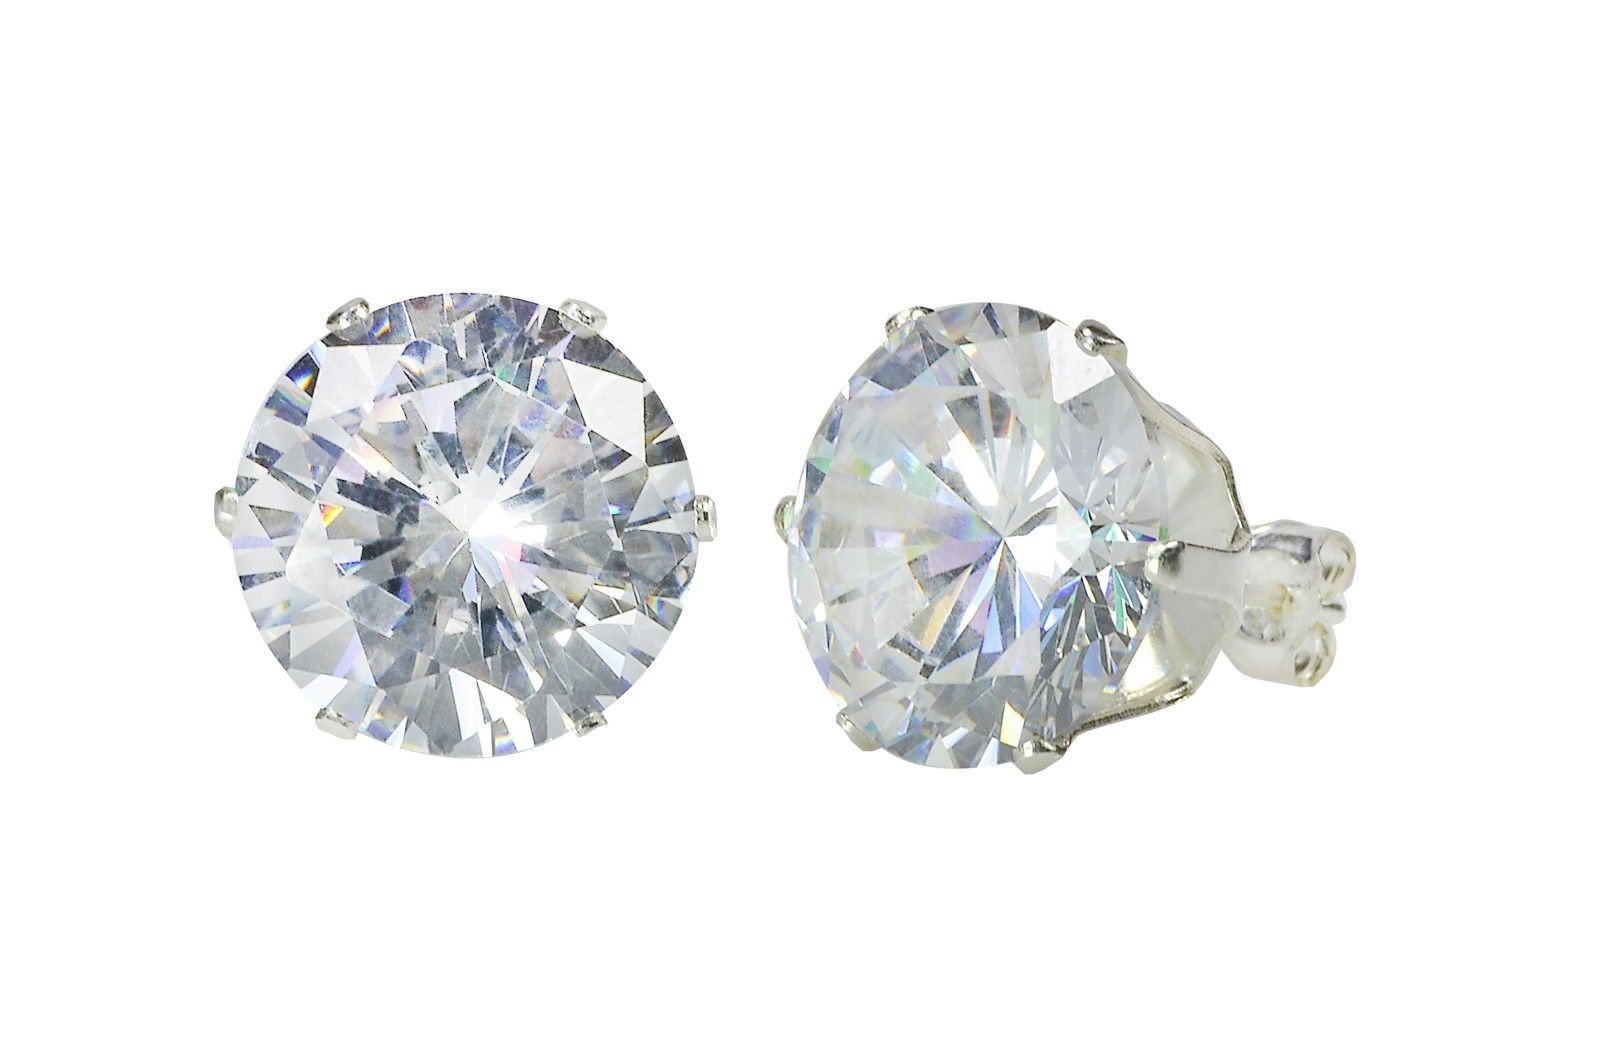 Sterling Silver CZ Stud Earrings Round Prong Set HUGE SIZES 9mm-14mm